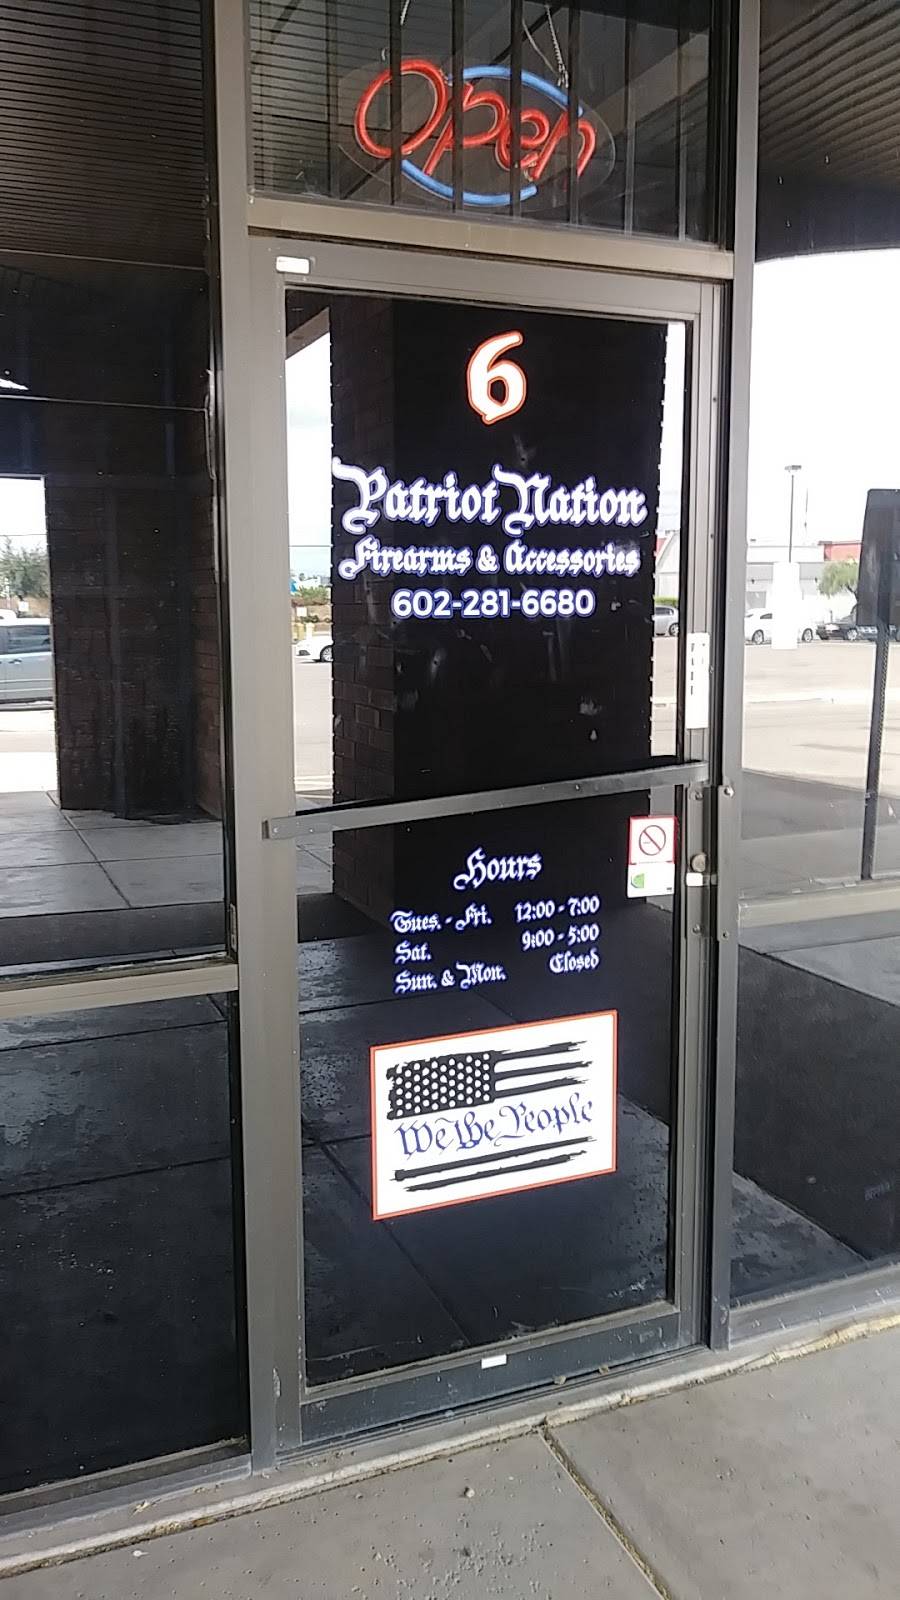 Patriot Nation Firearms and Accessories | 4139 W Bell Rd #6, Phoenix, AZ 85053, USA | Phone: (602) 281-6680